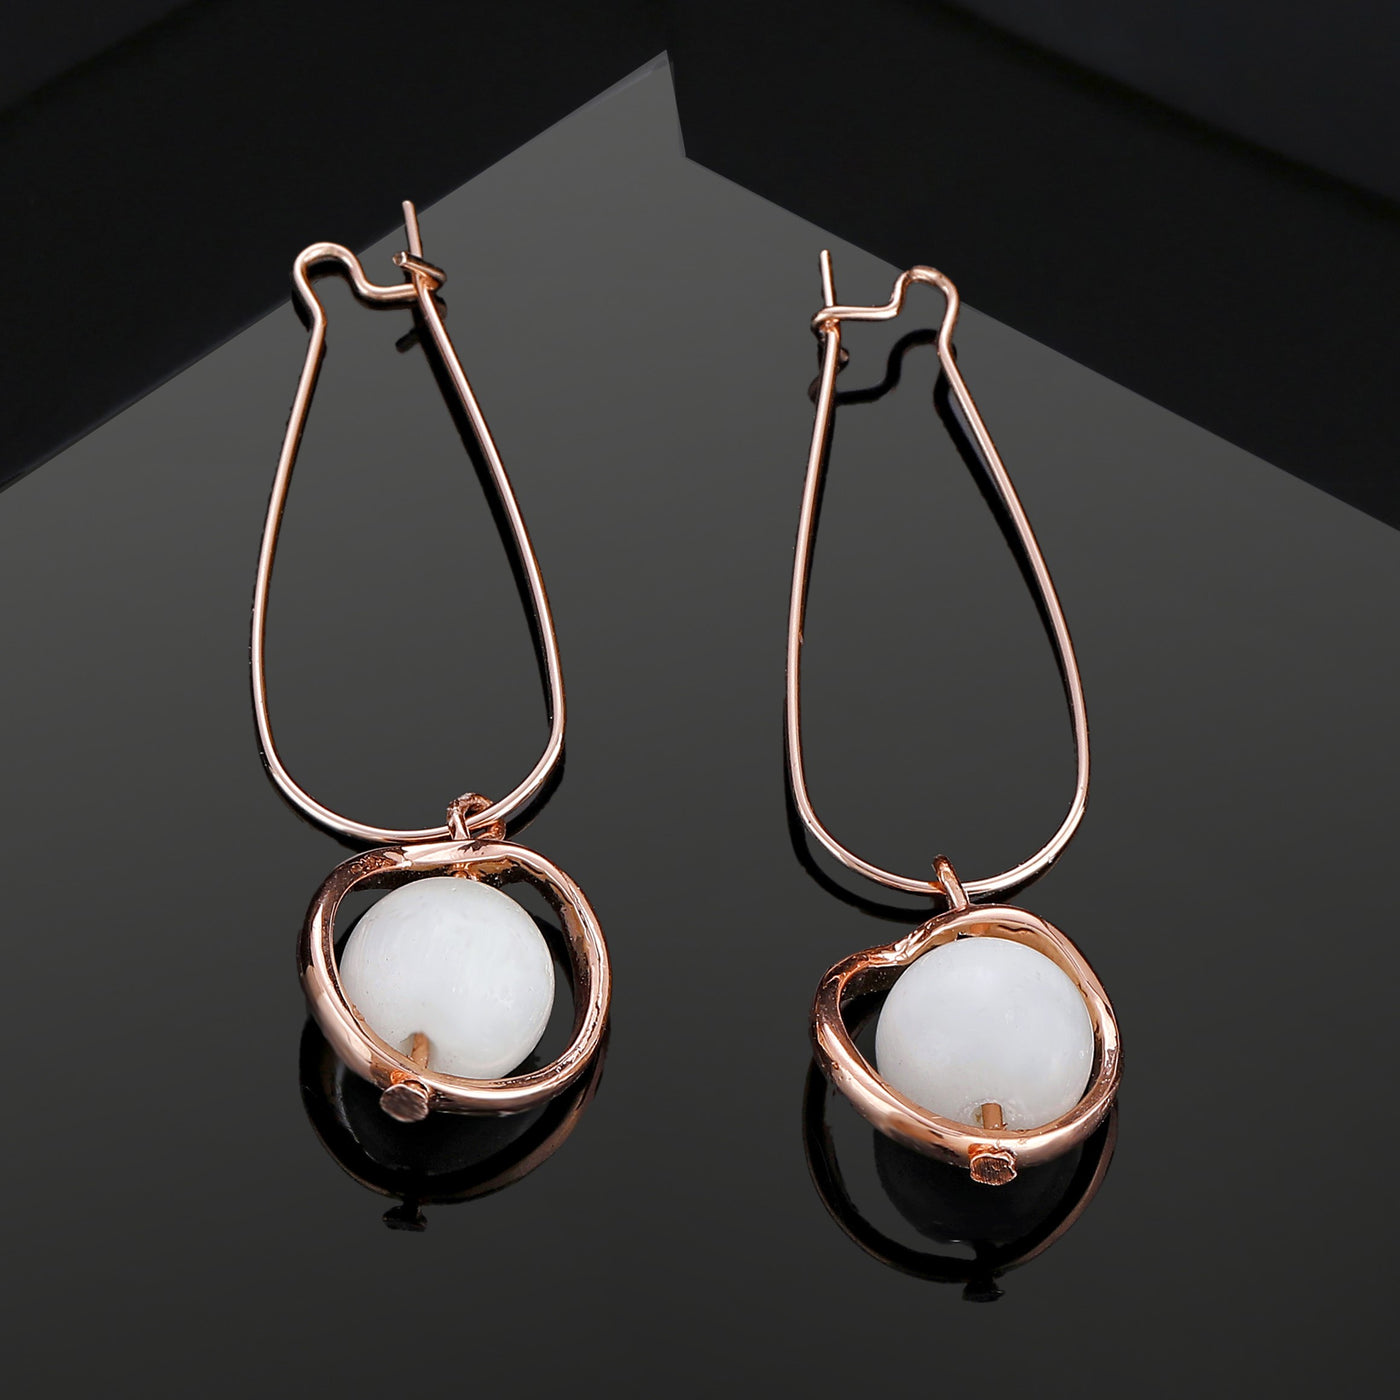 Estele Rose Gold Plated Glamorous Drop Earrings with White Pearls for Women